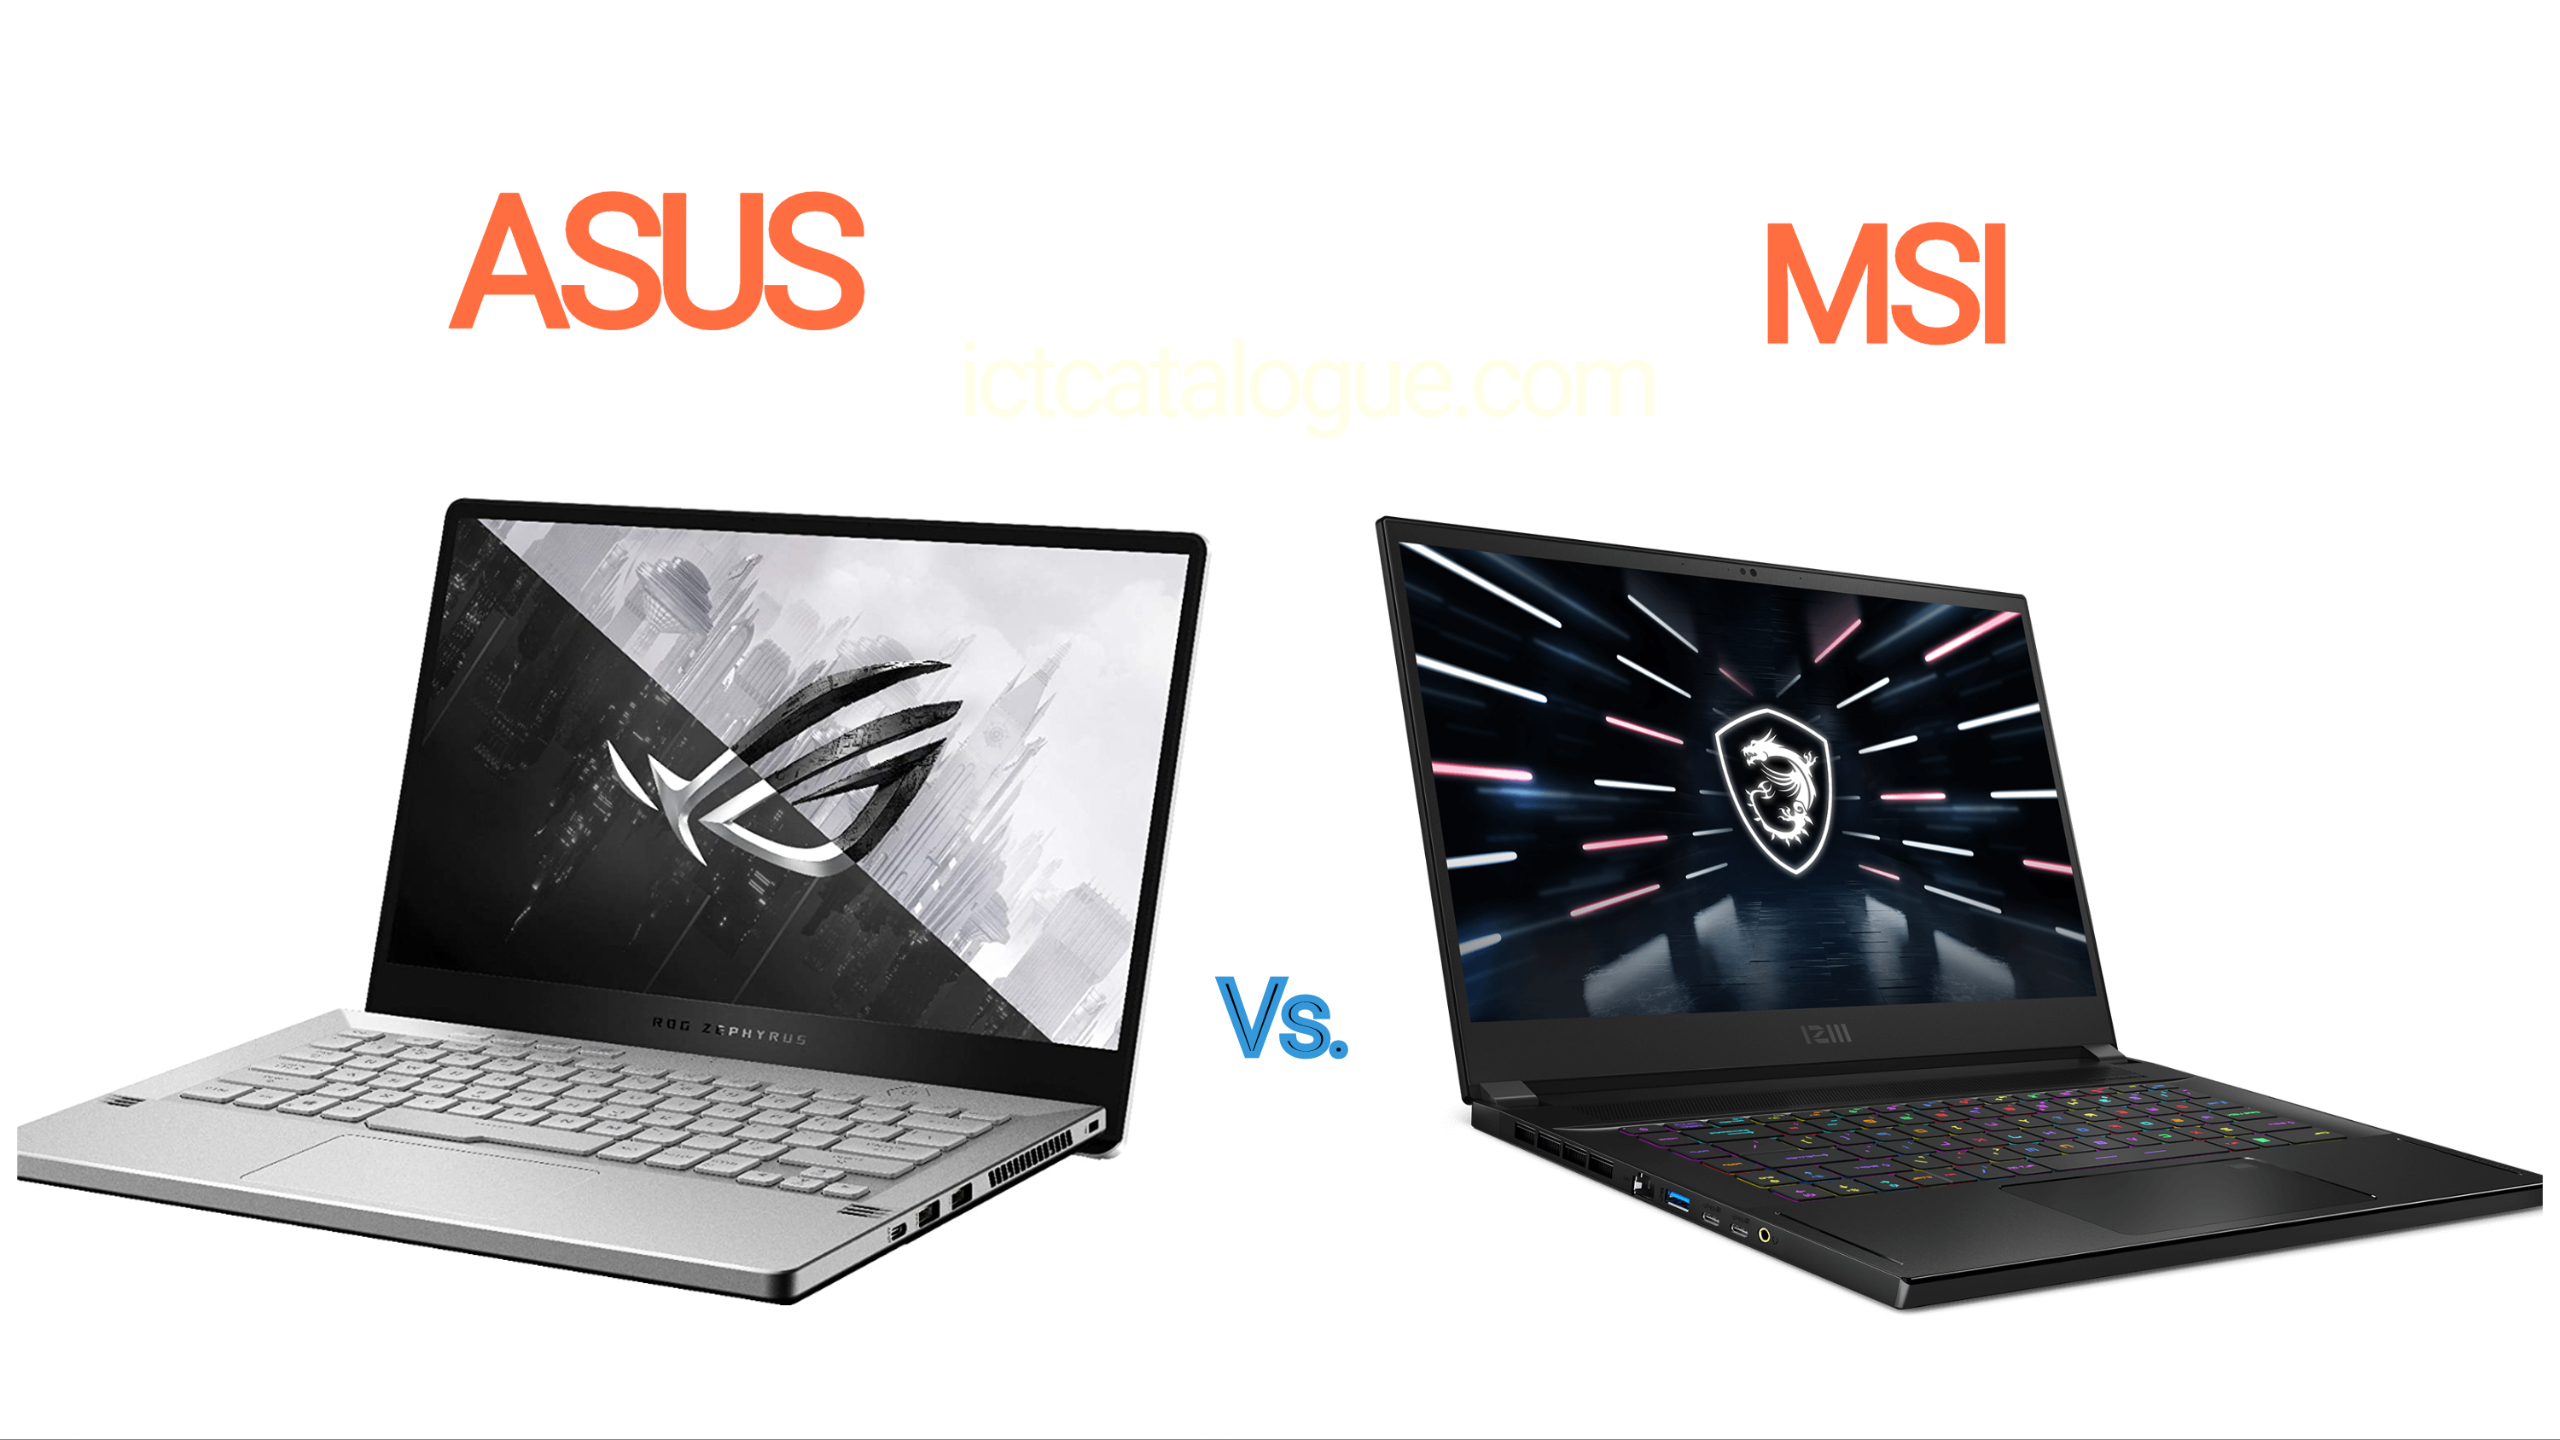 Asus vs MSI Gaming Laptop Specs and Price in USA